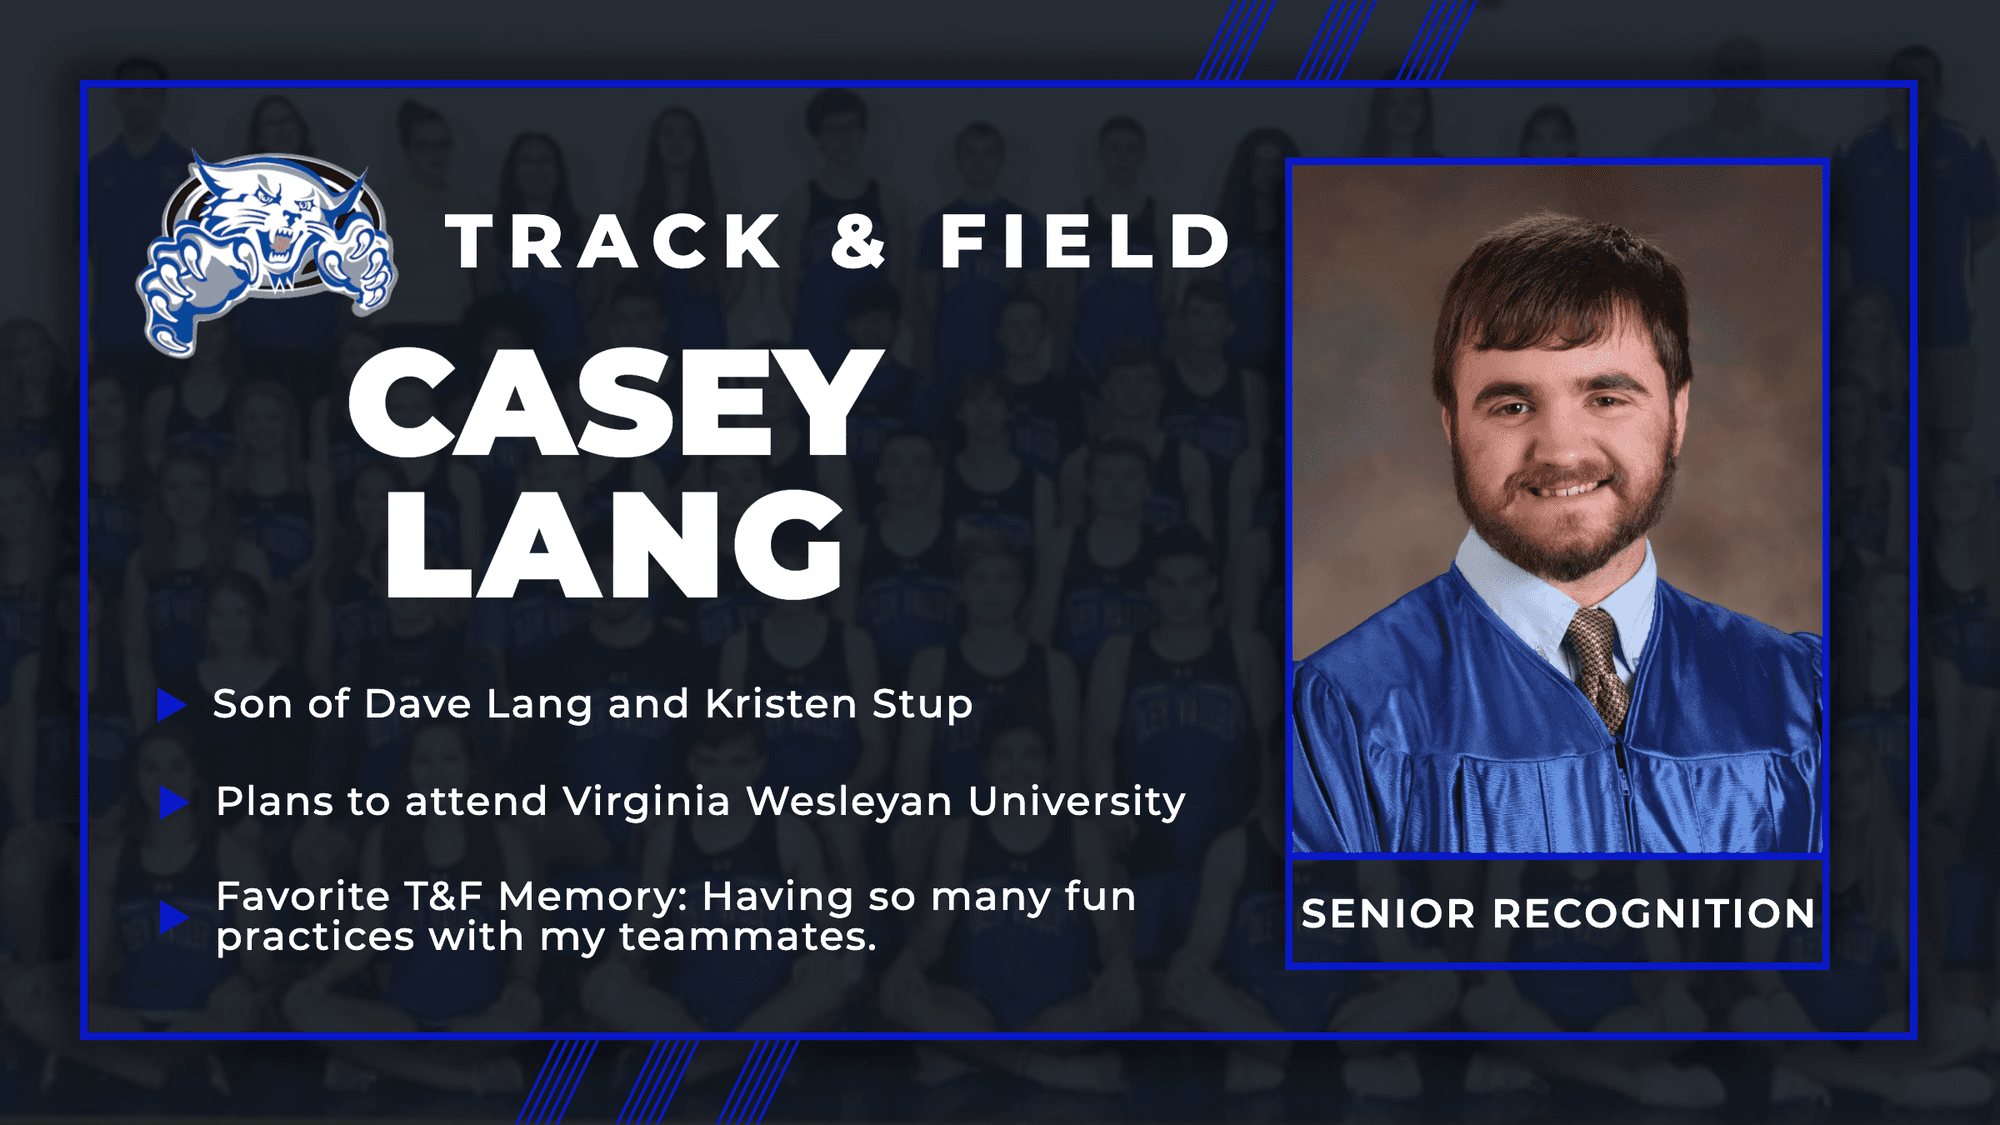 Casey Lang, Track & Field